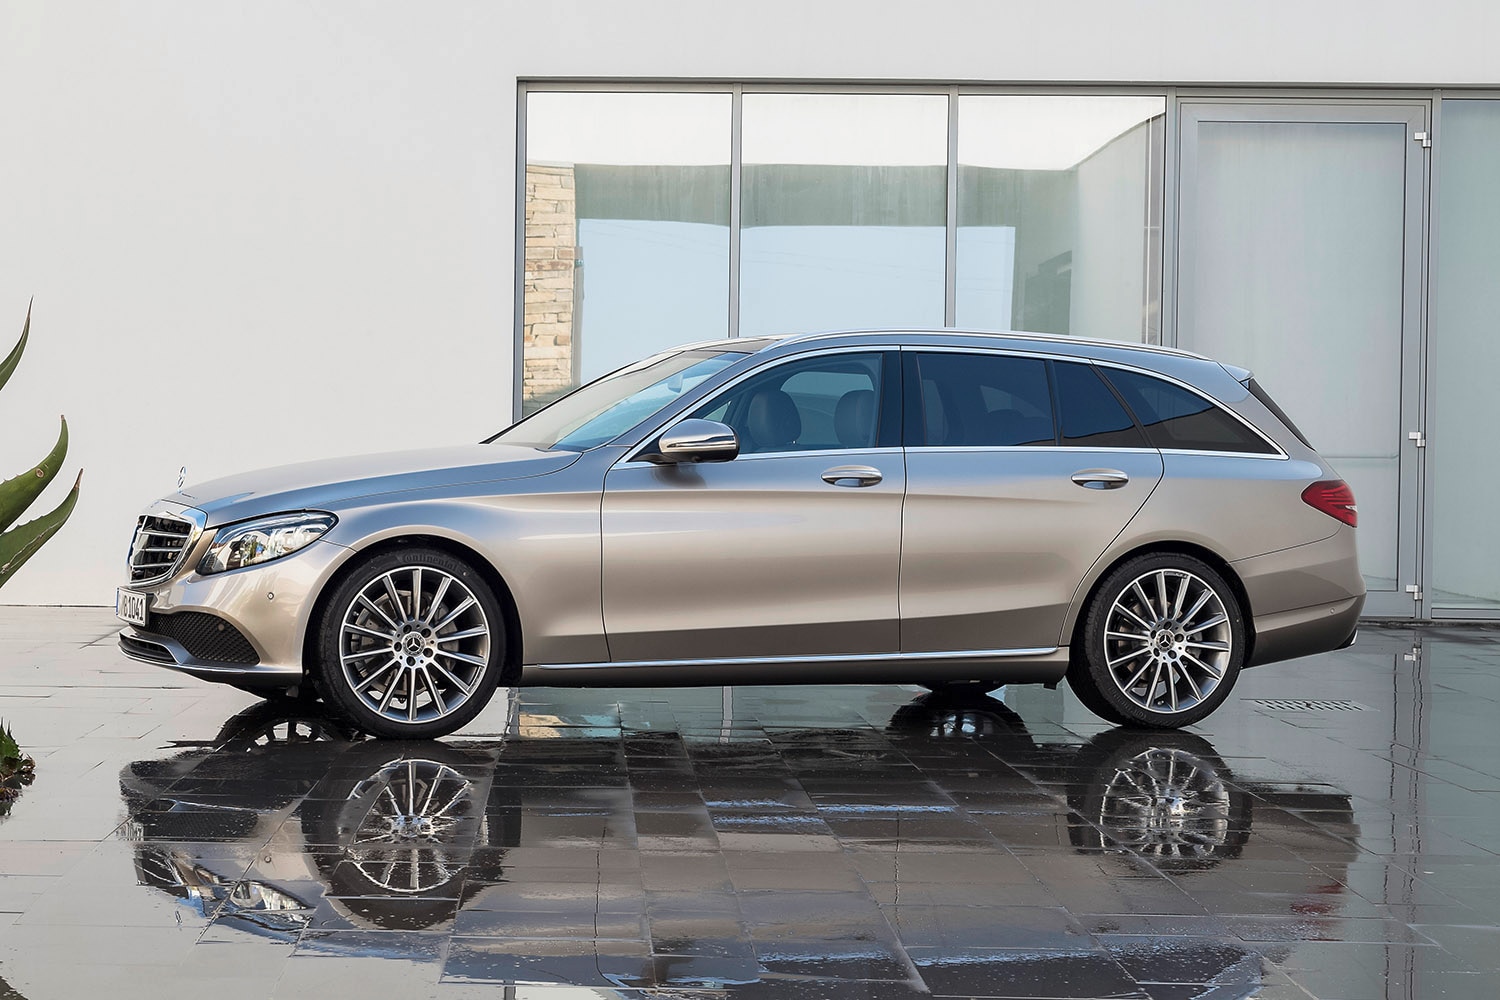 2018 Mercedes-Benz C-Class Wagon Mojave Silver Side